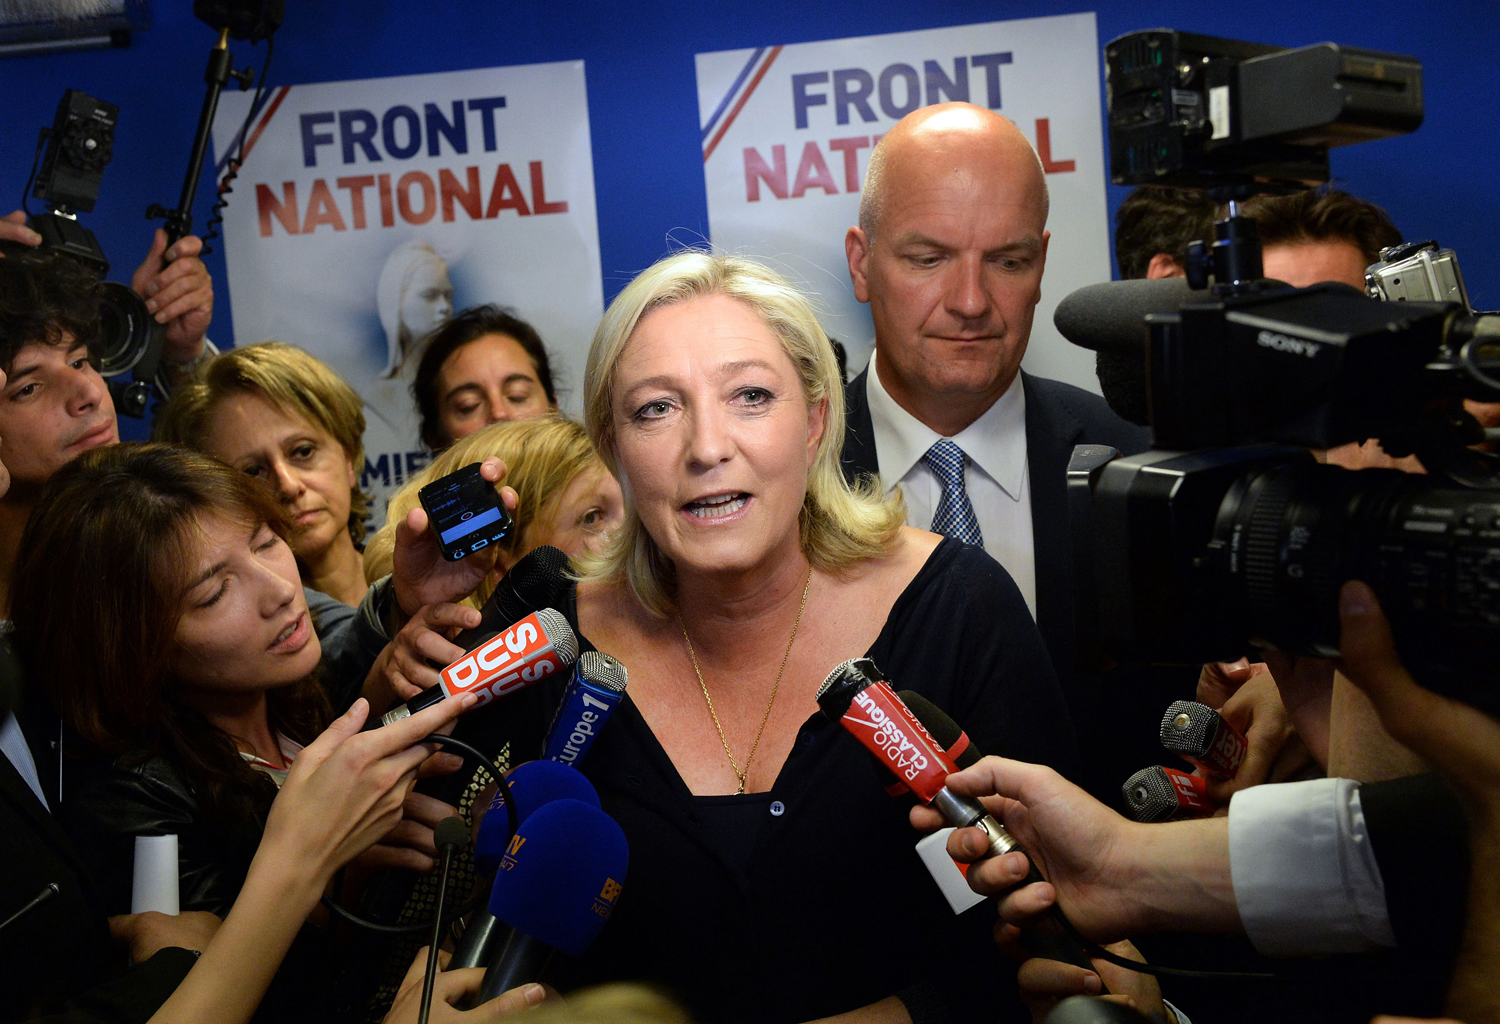 French far-right Front National party president Marine Le Pen reacts at the party's headquarters in Nanterre, outside Paris, on May 25, 2014.